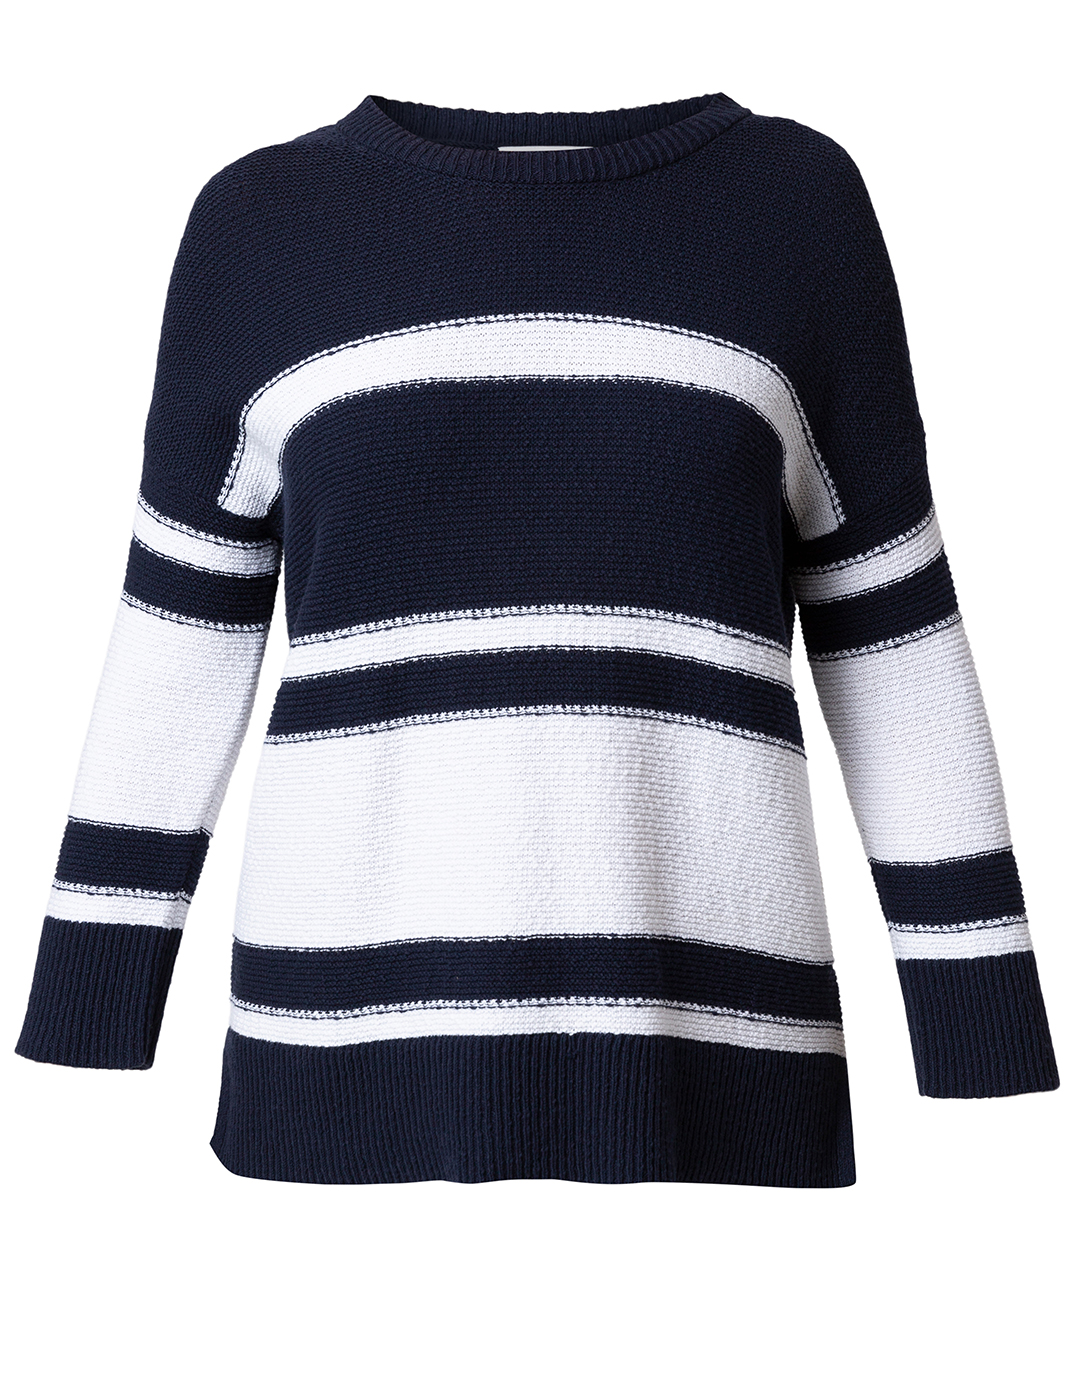 Navy and White Striped Cotton Sweater | Kinross | Halsbrook